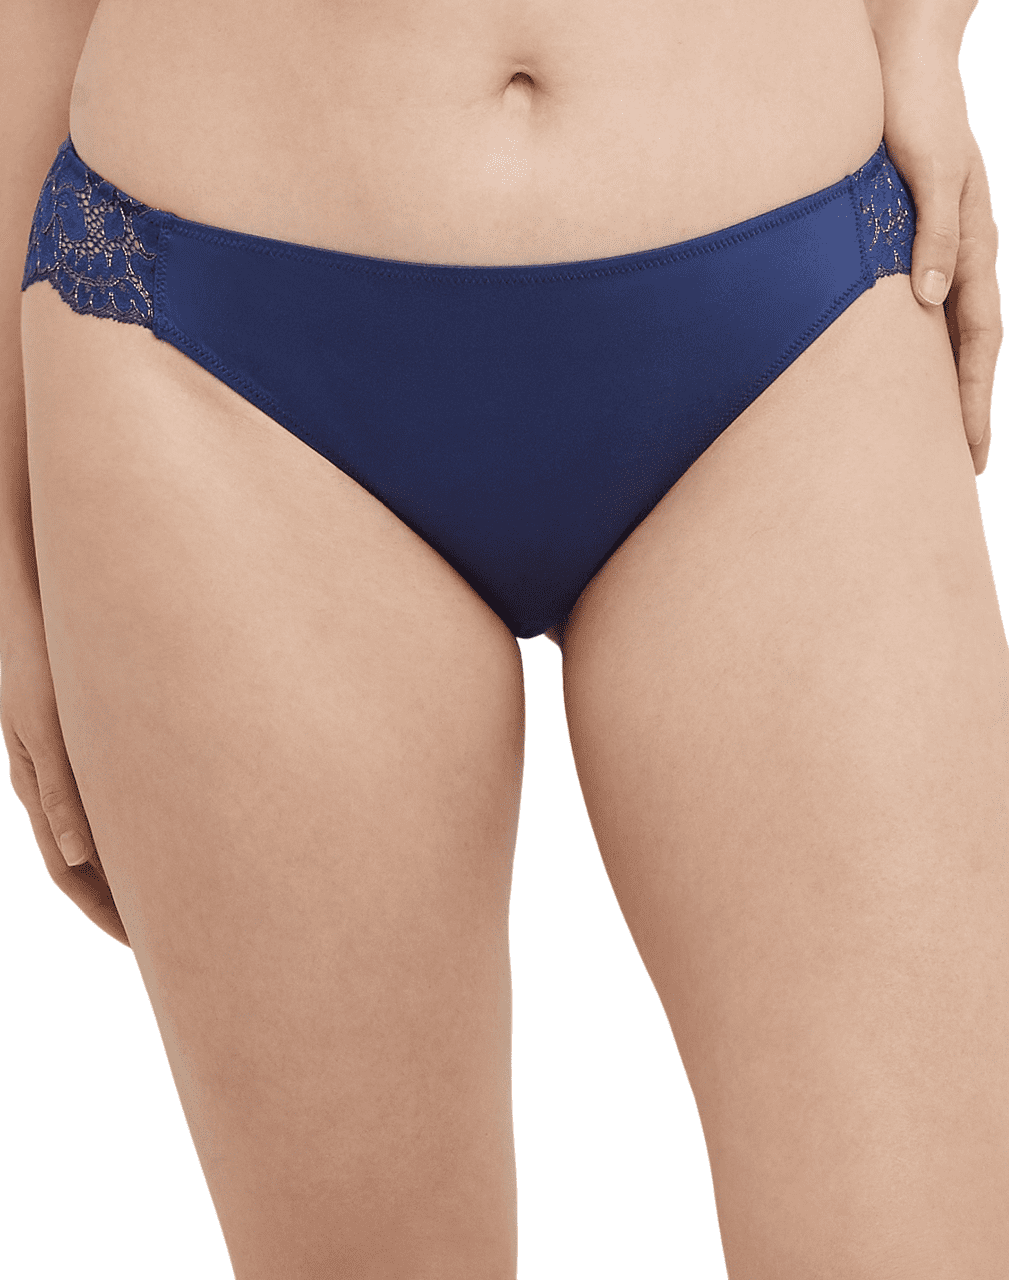  Maidenform Women's Underwear Back, Tanga Lace Thong Panties  (Retired Colors), Navy Eclipse/Gold, 6 : Clothing, Shoes & Jewelry